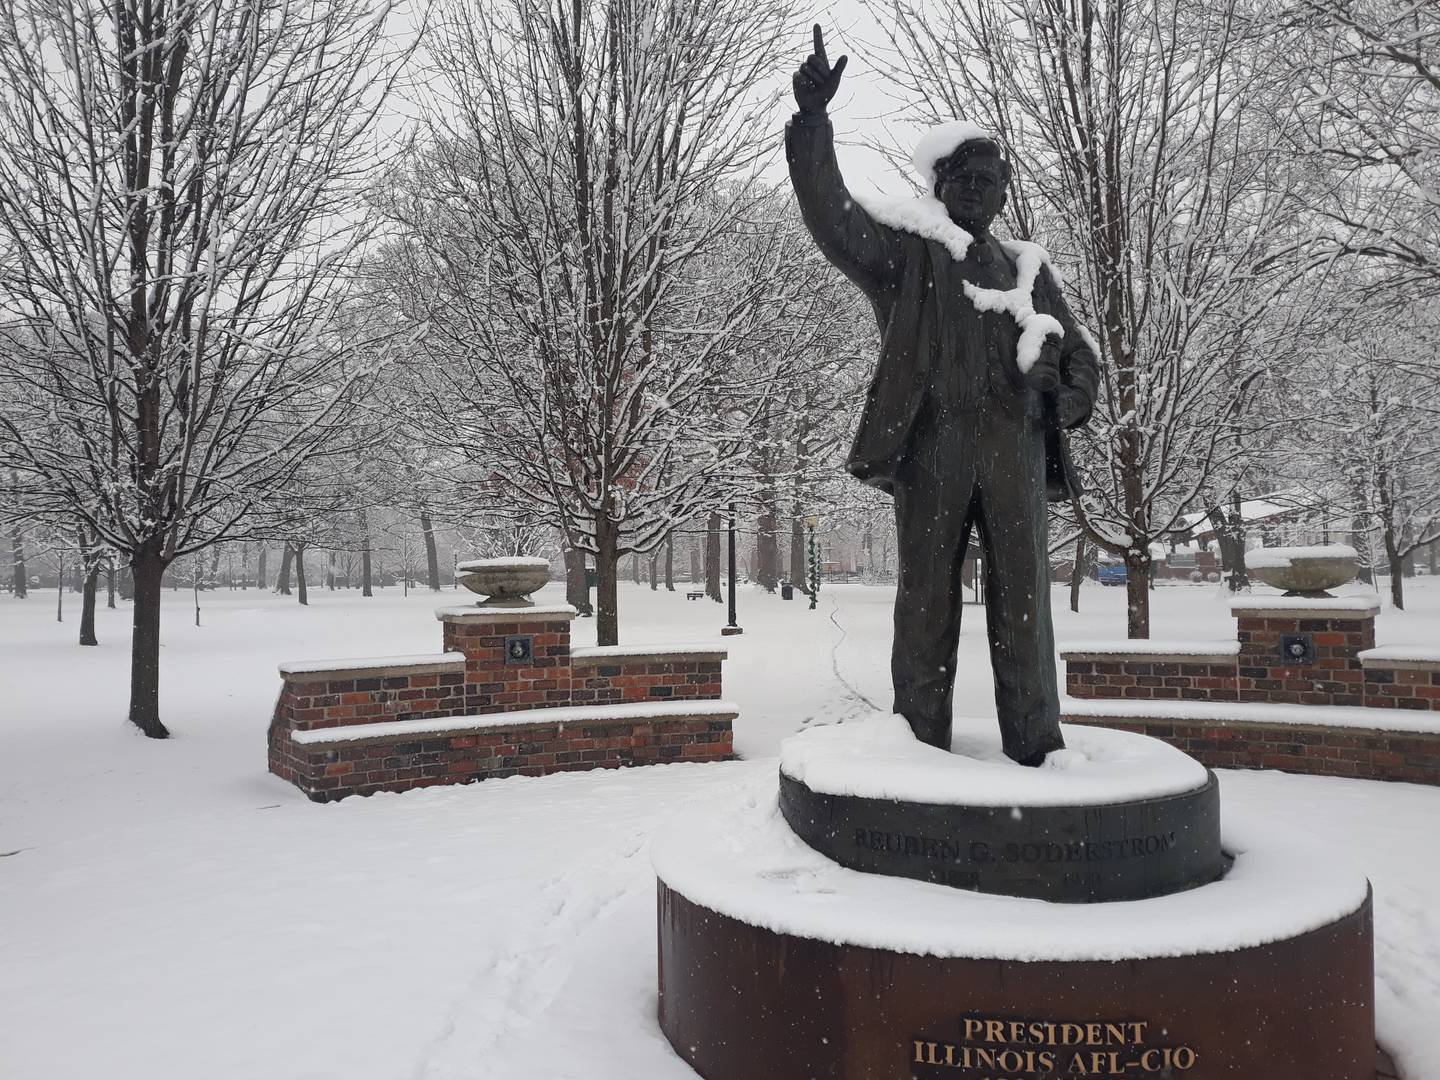 The Rueben Soderstrom statue in Streator's City Park is covered in snow Wednesday, Jan. 25, 2023.